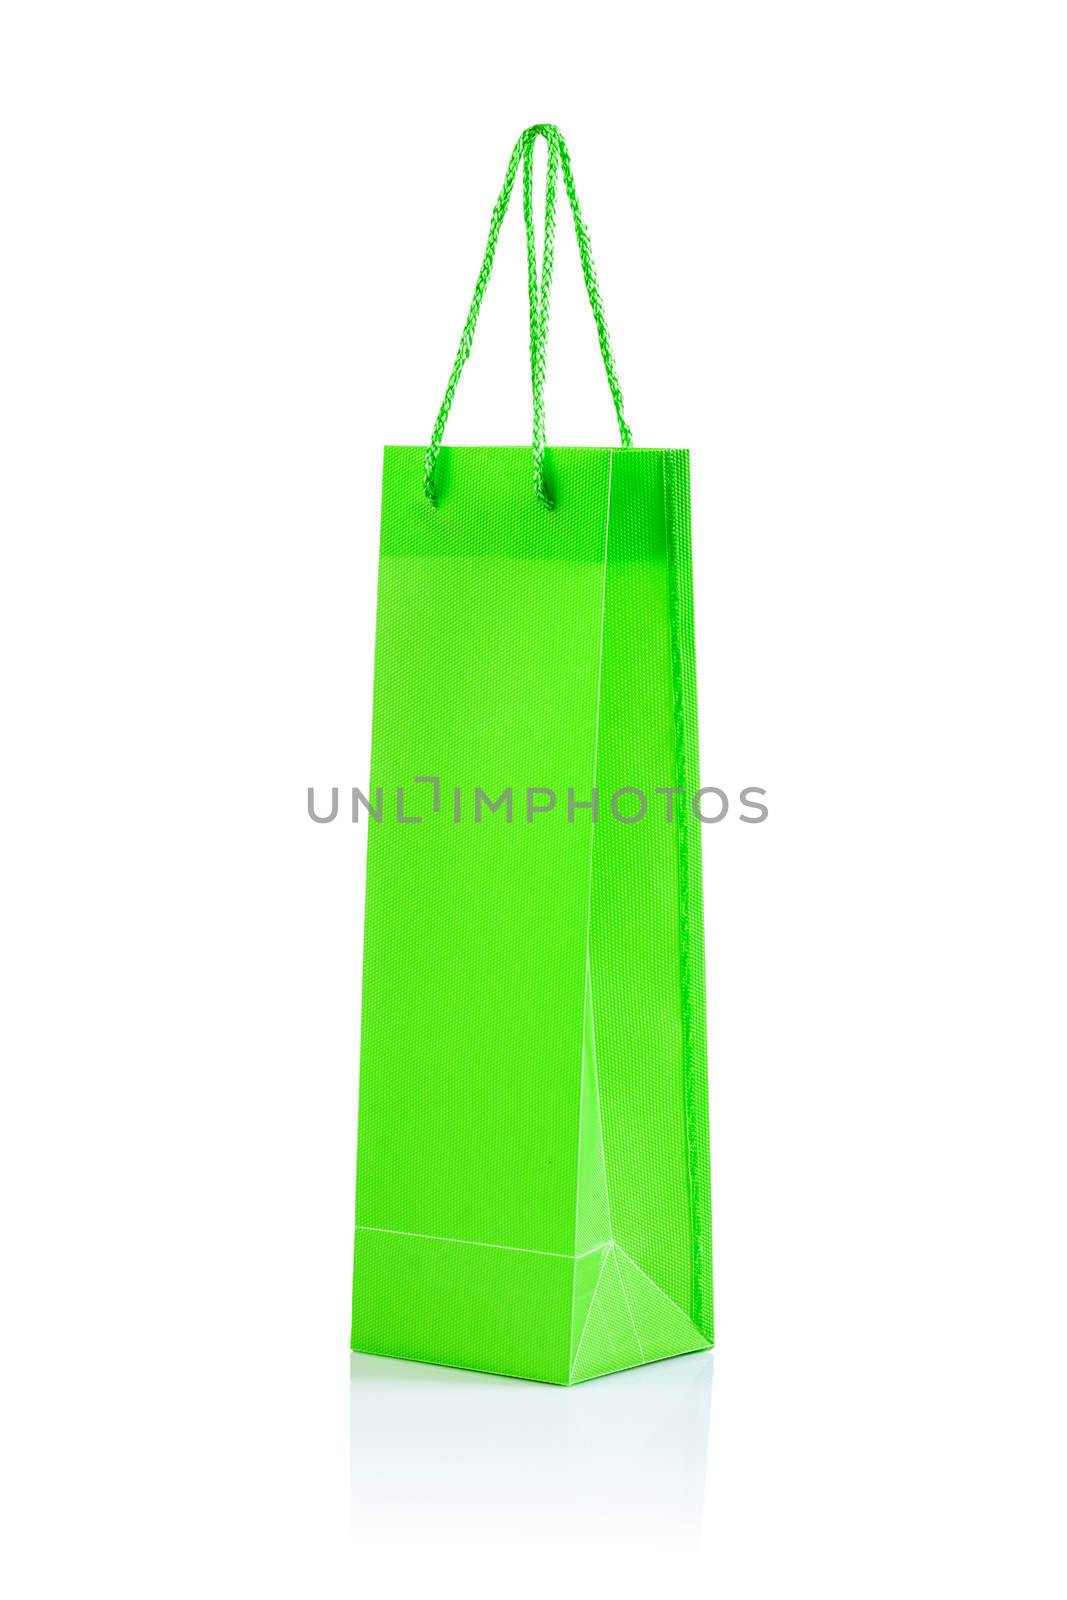 a green paper bag isolated on white